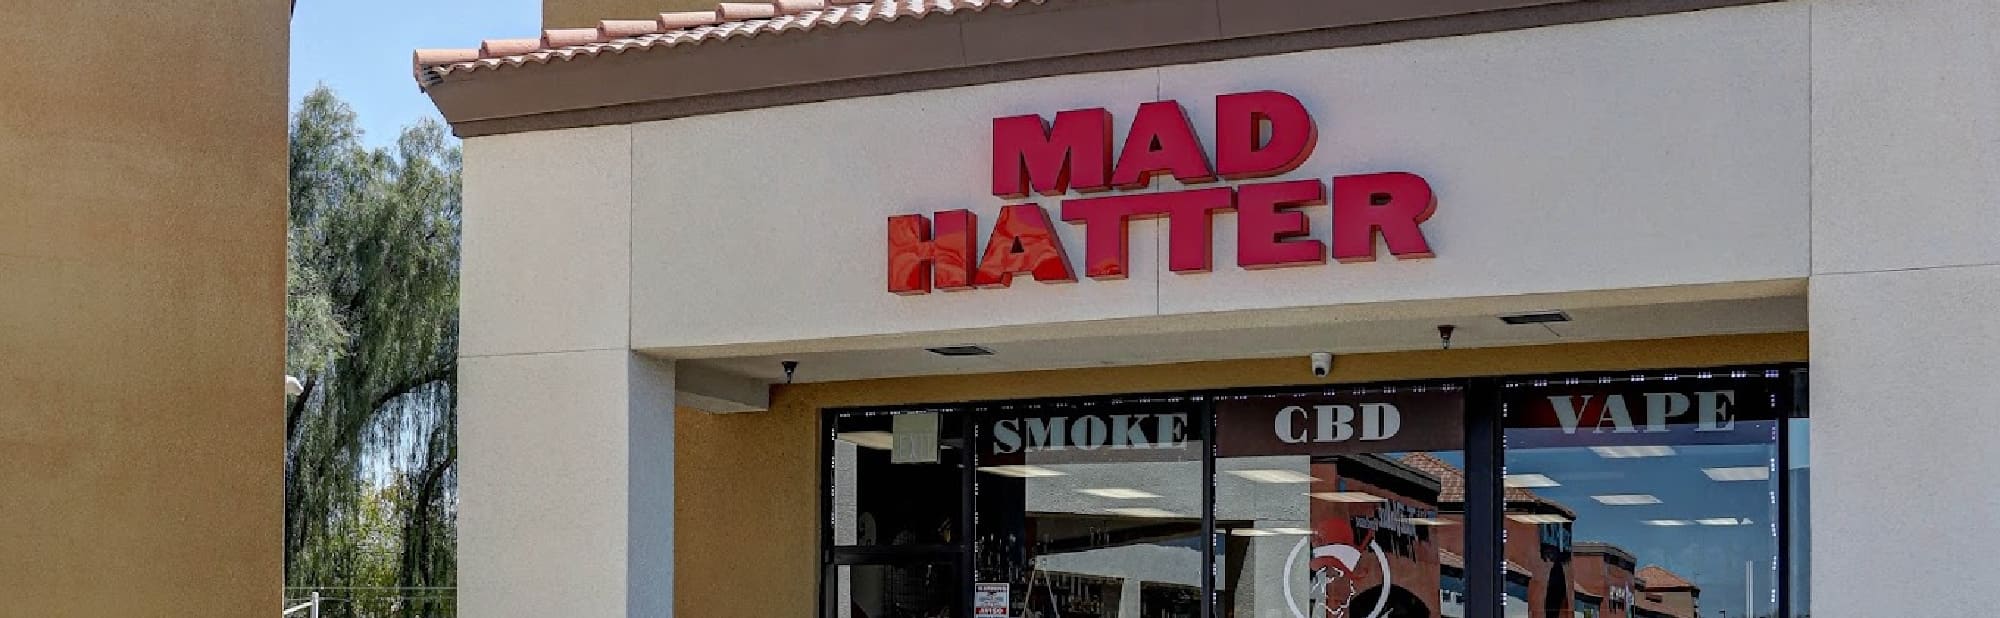 image of mad hatter smoke and kava in chandler az